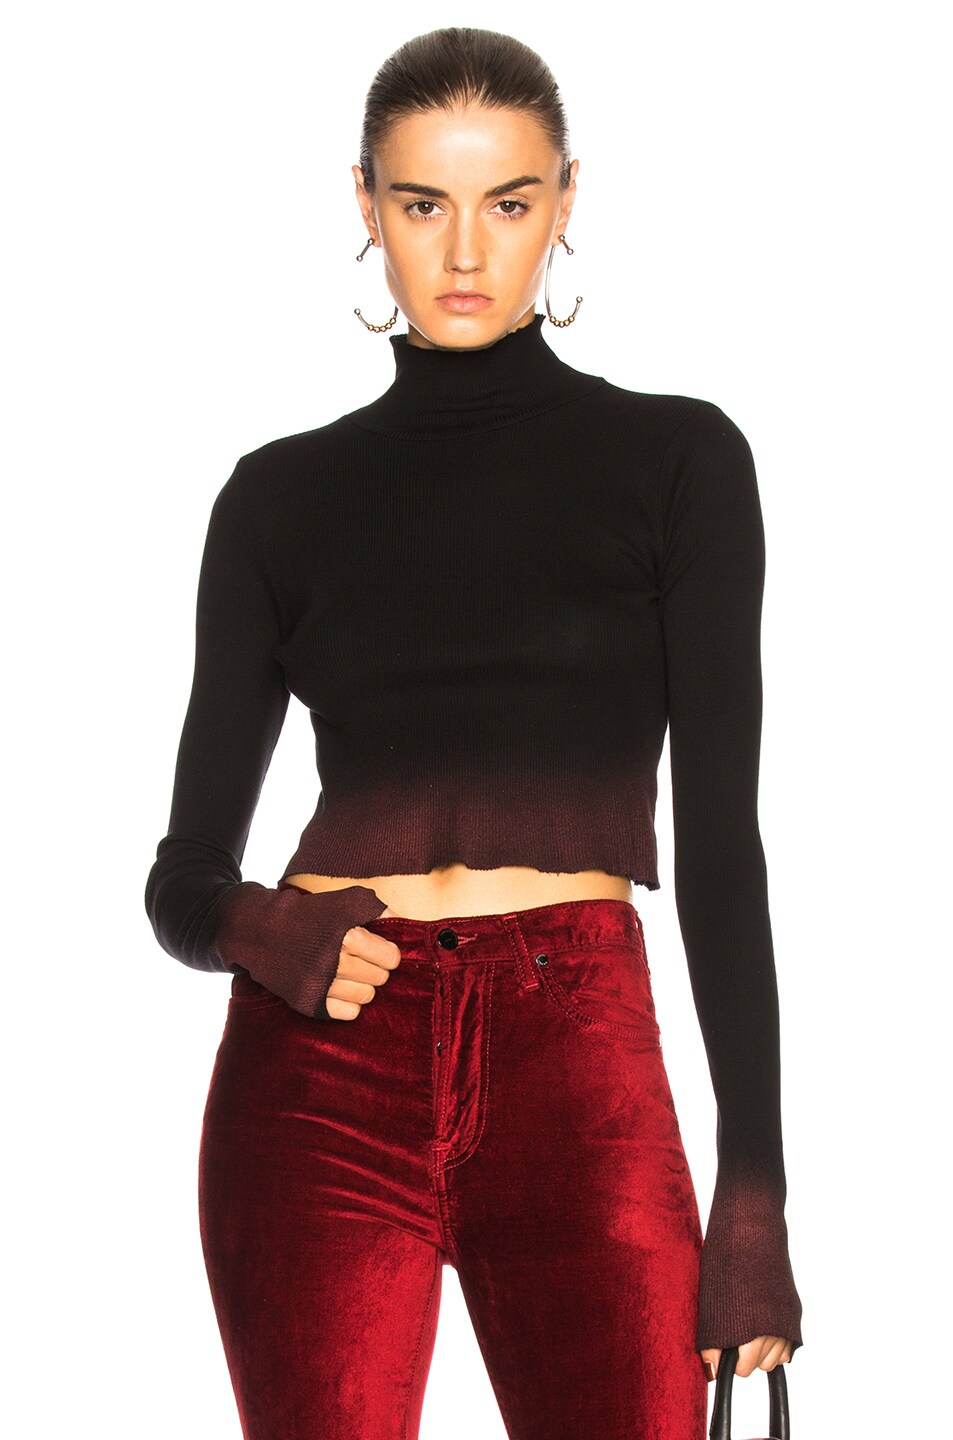 Image 1 of COTTON CITIZEN for FWRD Melbourne Crop Sweater in Black & Red Metallic